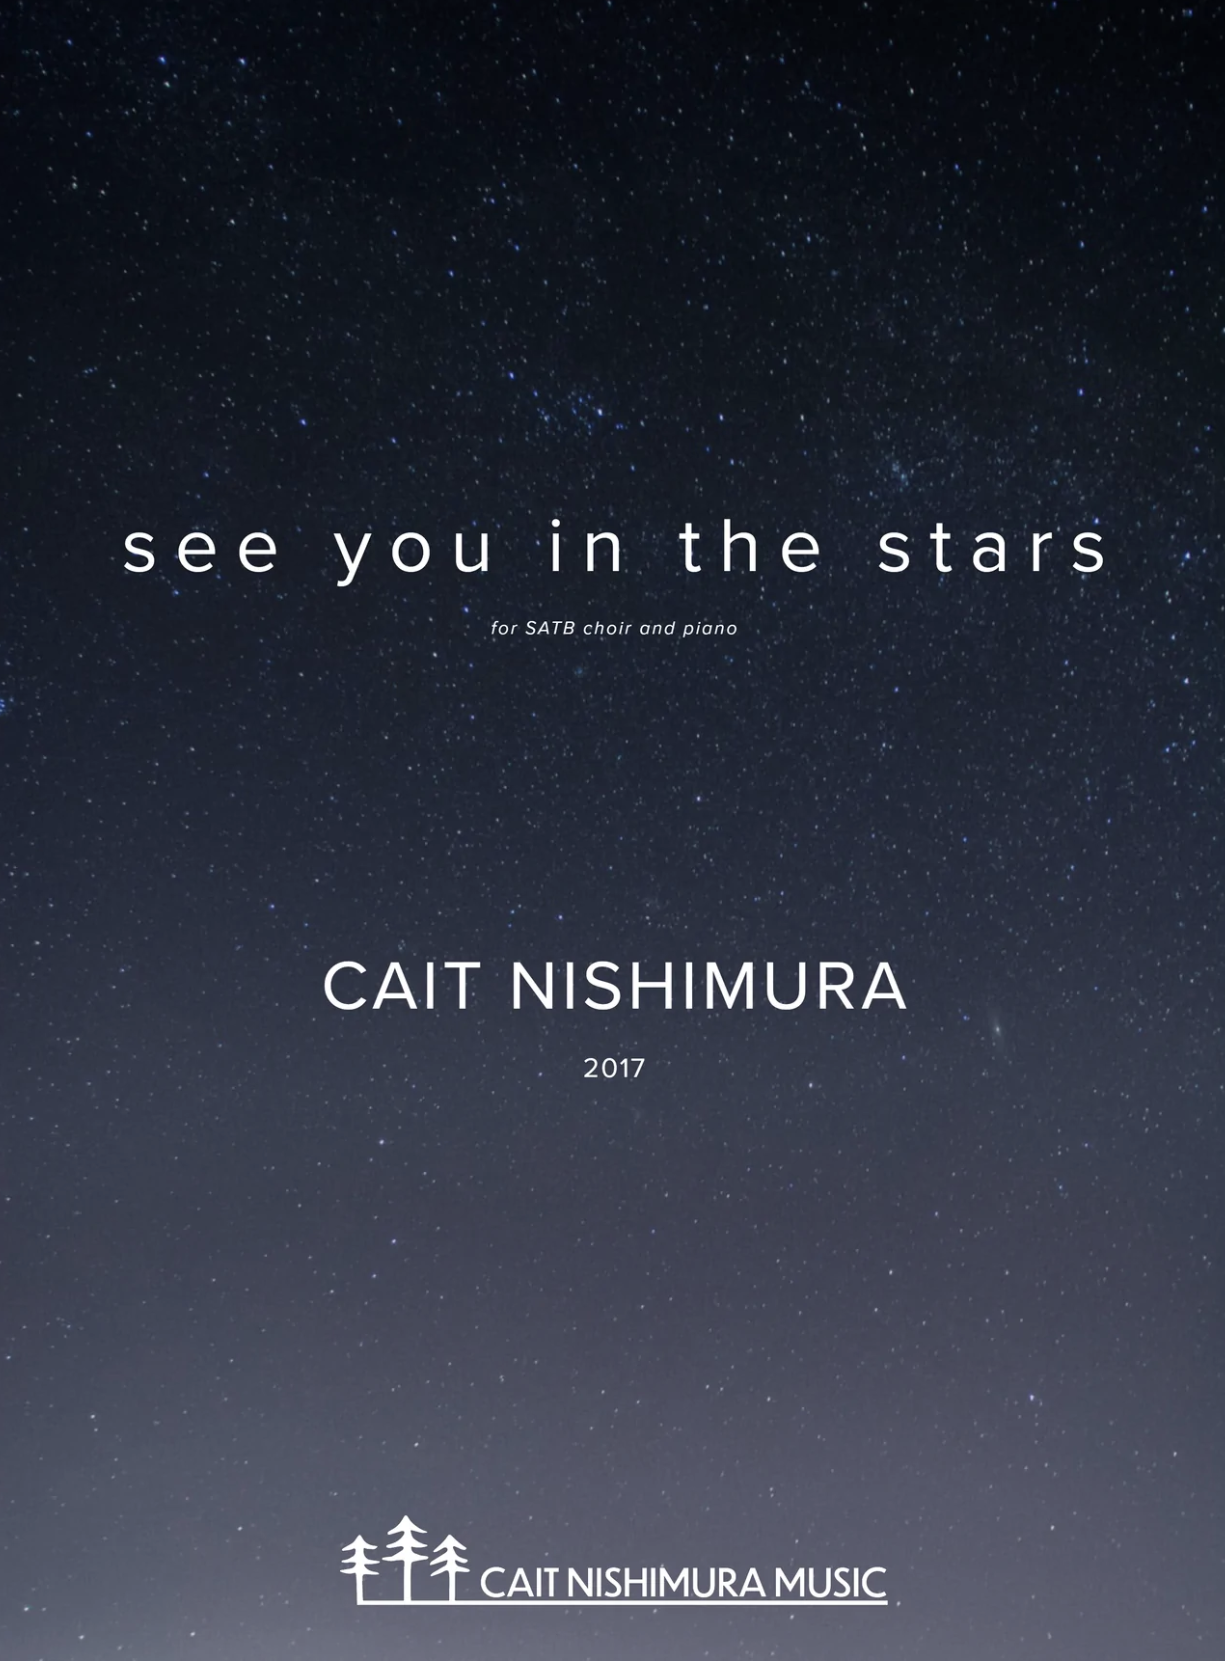 See You In The Stars by Cait Nishimura